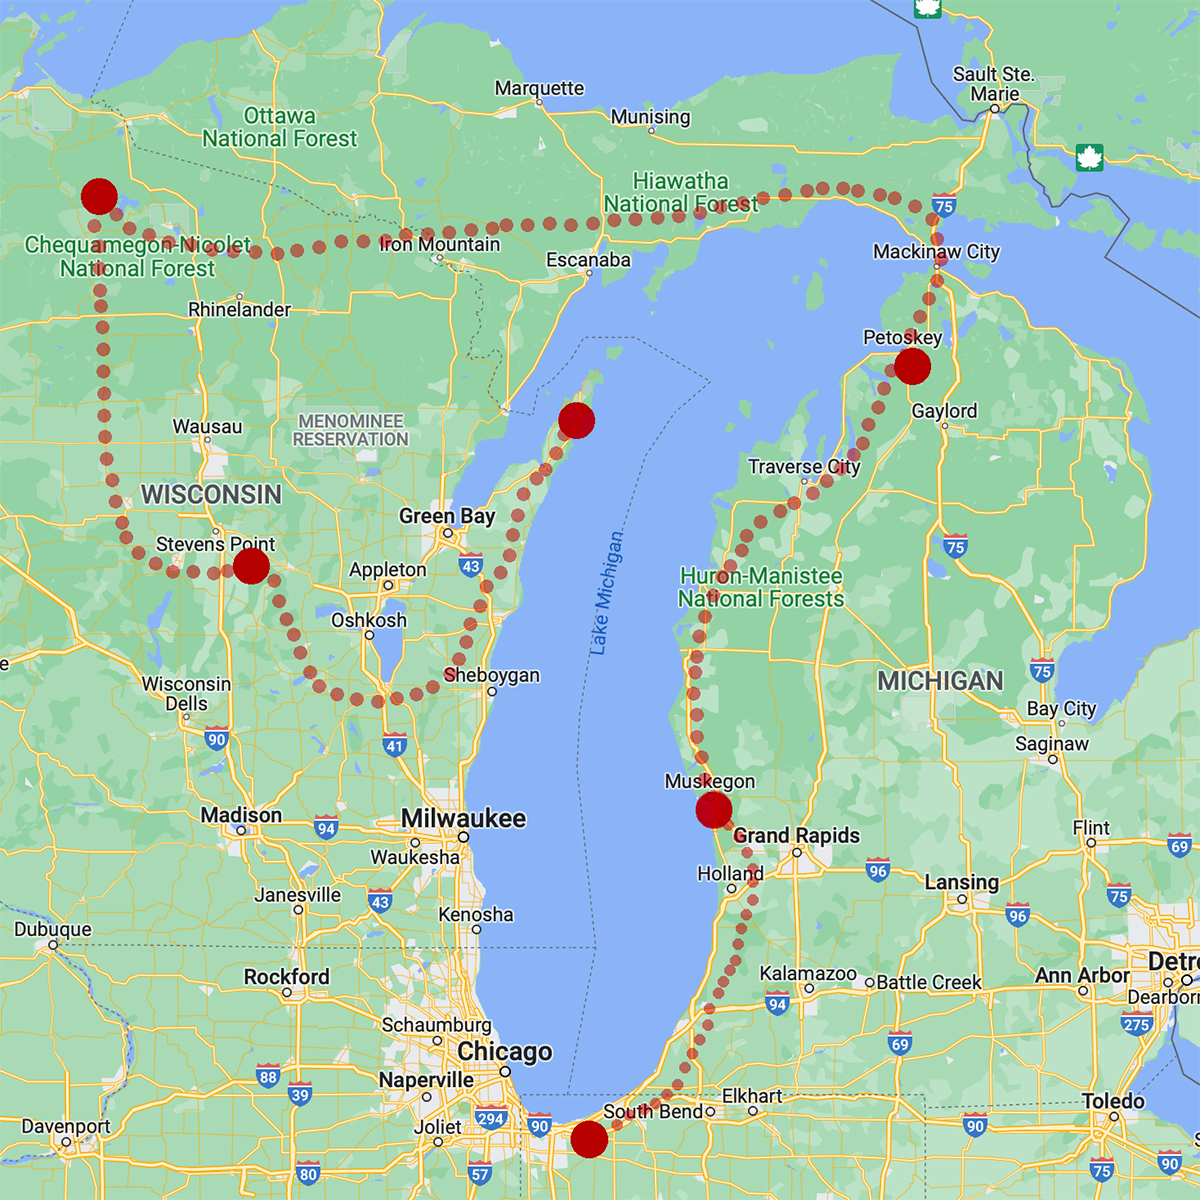 A map showing our journey around Lake Michigan.